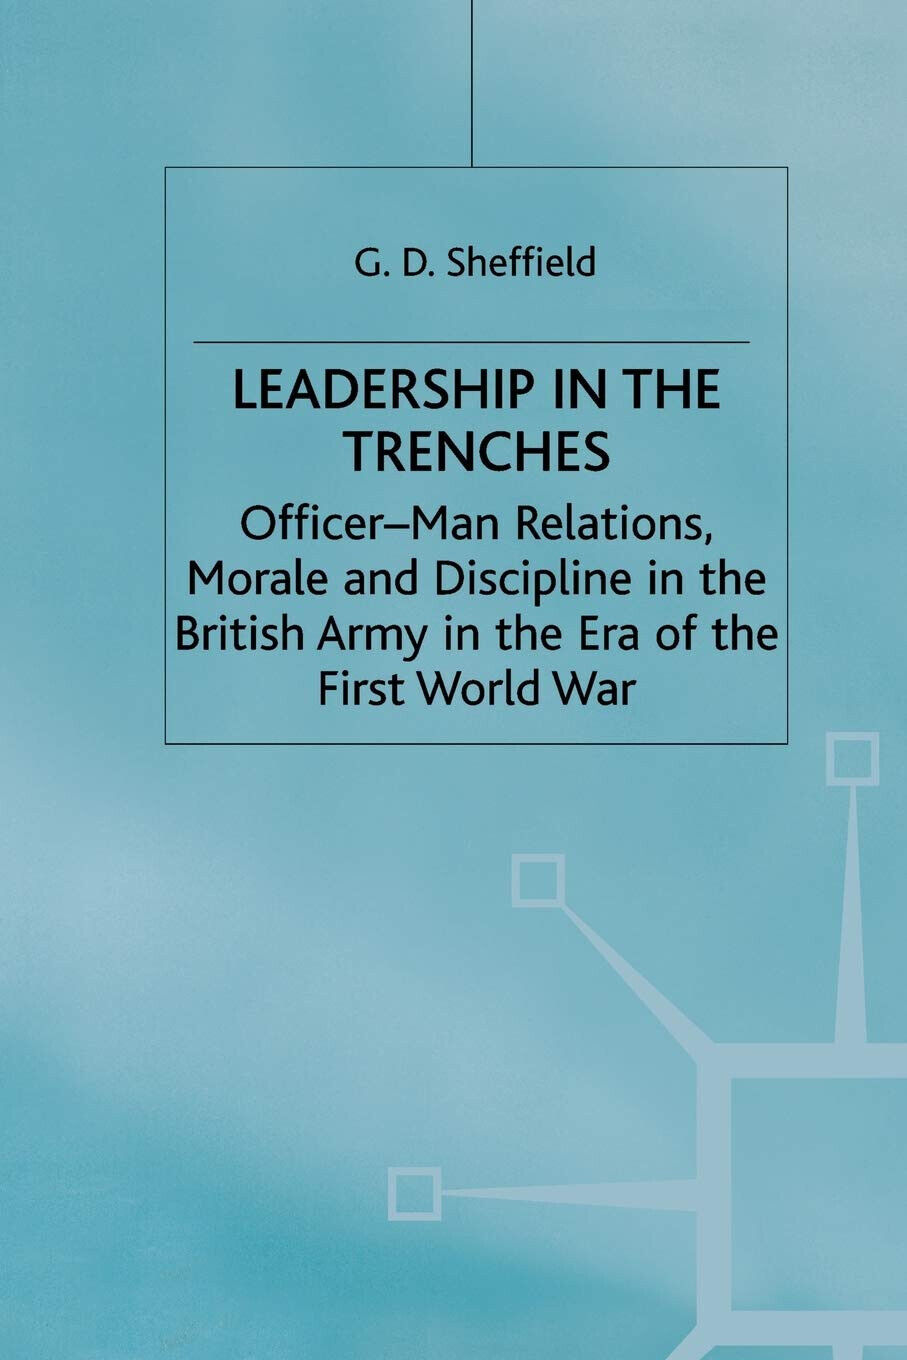 Leadership in the Trenches - G. Sheffield - Palgrave, 2000 libro usato